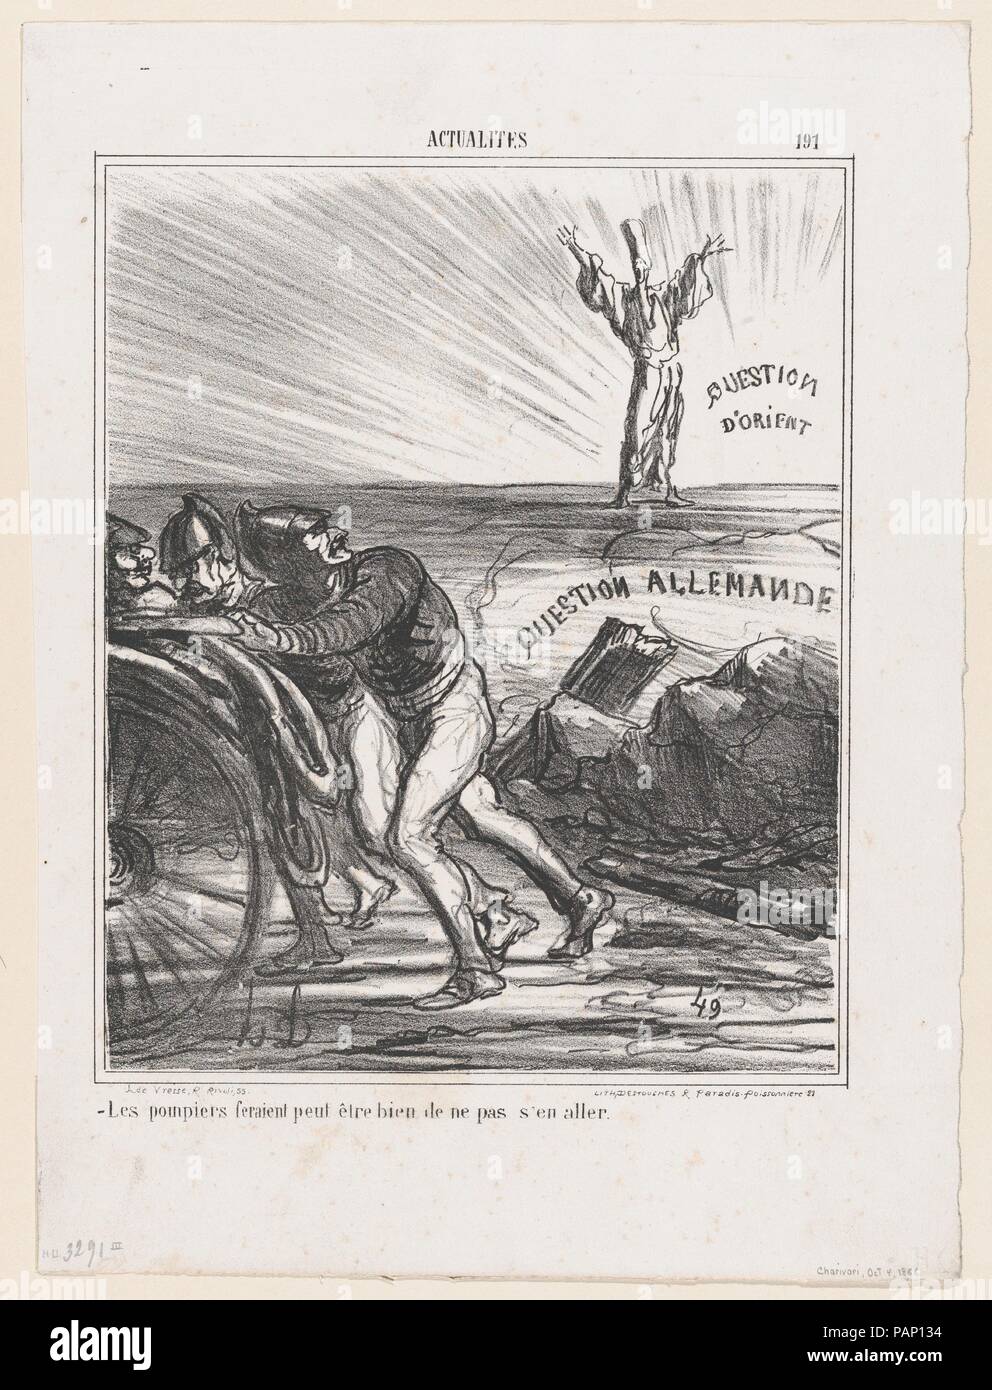 Maybe the firemen really shouldn't leave just yet, from 'News of the day,' published in Le Charivari, October 4, 1866. Artist: Honoré Daumier (French, Marseilles 1808-1879 Valmondois). Dimensions: Image: 10 3/16 × 8 1/4 in. (25.9 × 21 cm)  Sheet: 14 1/8 × 10 3/8 in. (35.9 × 26.4 cm). Printer: Destouches (Paris). Publisher: Arnaud de Vresse. Series/Portfolio: 'News of the day' (Actualités). Date: October 4, 1866. Museum: Metropolitan Museum of Art, New York, USA. Stock Photo